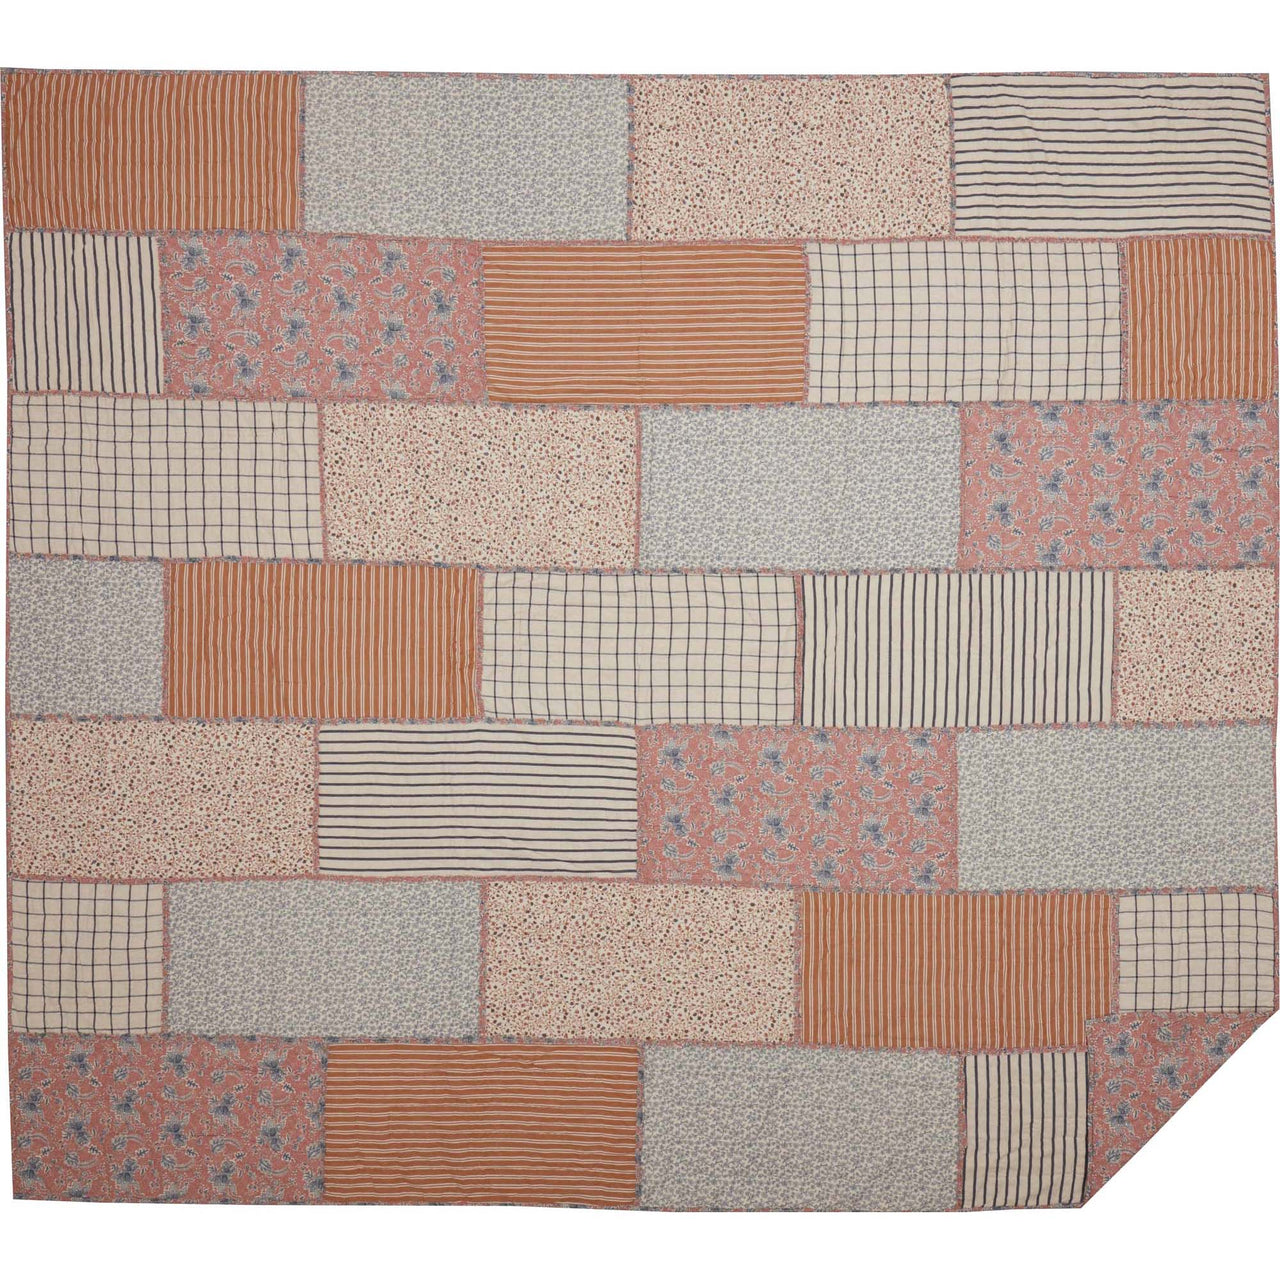 Kaila King Quilt 105Wx95L VHC Brands